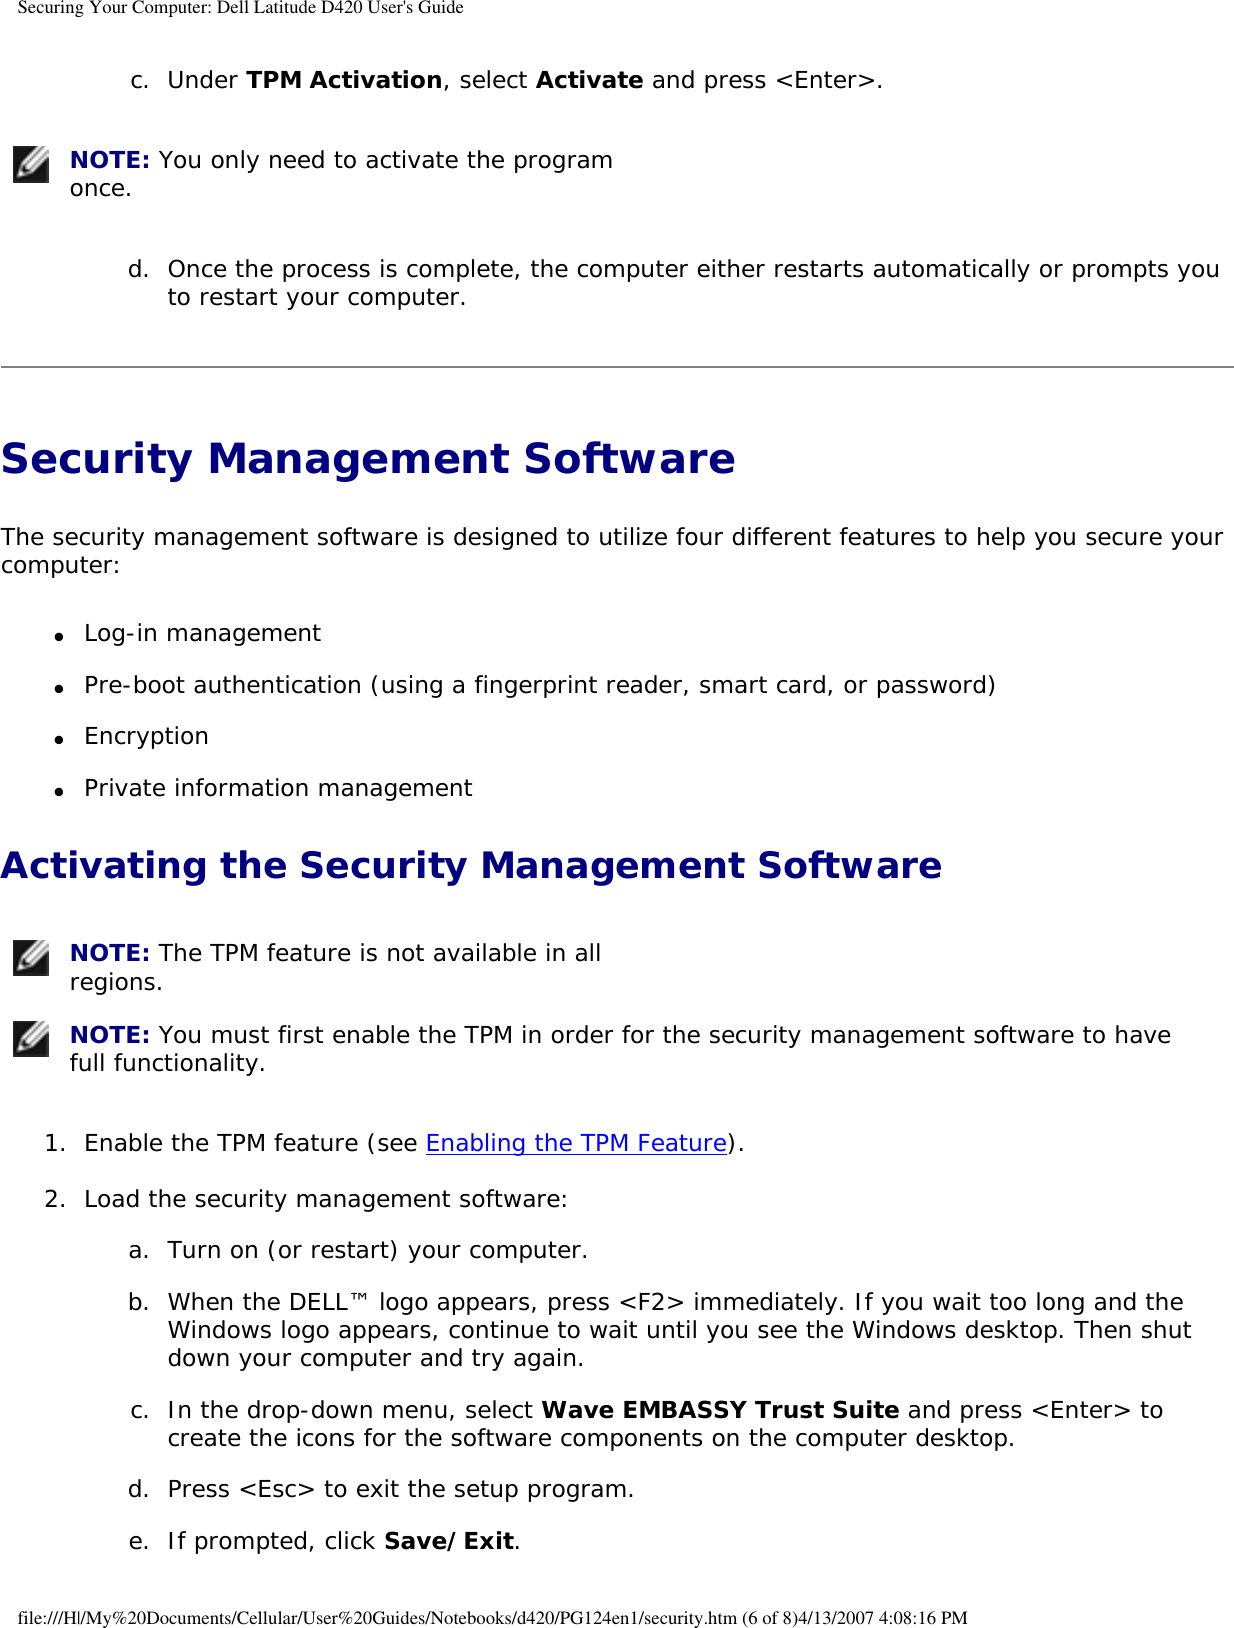 Securing Your Computer: Dell Latitude D420 User&apos;s Guide c.  Under TPM Activation, select Activate and press &lt;Enter&gt;.    NOTE: You only need to activate the program once. d.  Once the process is complete, the computer either restarts automatically or prompts you to restart your computer.   Security Management Software The security management software is designed to utilize four different features to help you secure your computer:●     Log-in management  ●     Pre-boot authentication (using a fingerprint reader, smart card, or password)  ●     Encryption  ●     Private information management  Activating the Security Management Software NOTE: The TPM feature is not available in all regions.  NOTE: You must first enable the TPM in order for the security management software to have full functionality. 1.  Enable the TPM feature (see Enabling the TPM Feature).   2.  Load the security management software:   a.  Turn on (or restart) your computer.   b.  When the DELL™ logo appears, press &lt;F2&gt; immediately. If you wait too long and the Windows logo appears, continue to wait until you see the Windows desktop. Then shut down your computer and try again.   c.  In the drop-down menu, select Wave EMBASSY Trust Suite and press &lt;Enter&gt; to create the icons for the software components on the computer desktop.   d.  Press &lt;Esc&gt; to exit the setup program.   e.  If prompted, click Save/Exit.  file:///H|/My%20Documents/Cellular/User%20Guides/Notebooks/d420/PG124en1/security.htm (6 of 8)4/13/2007 4:08:16 PM